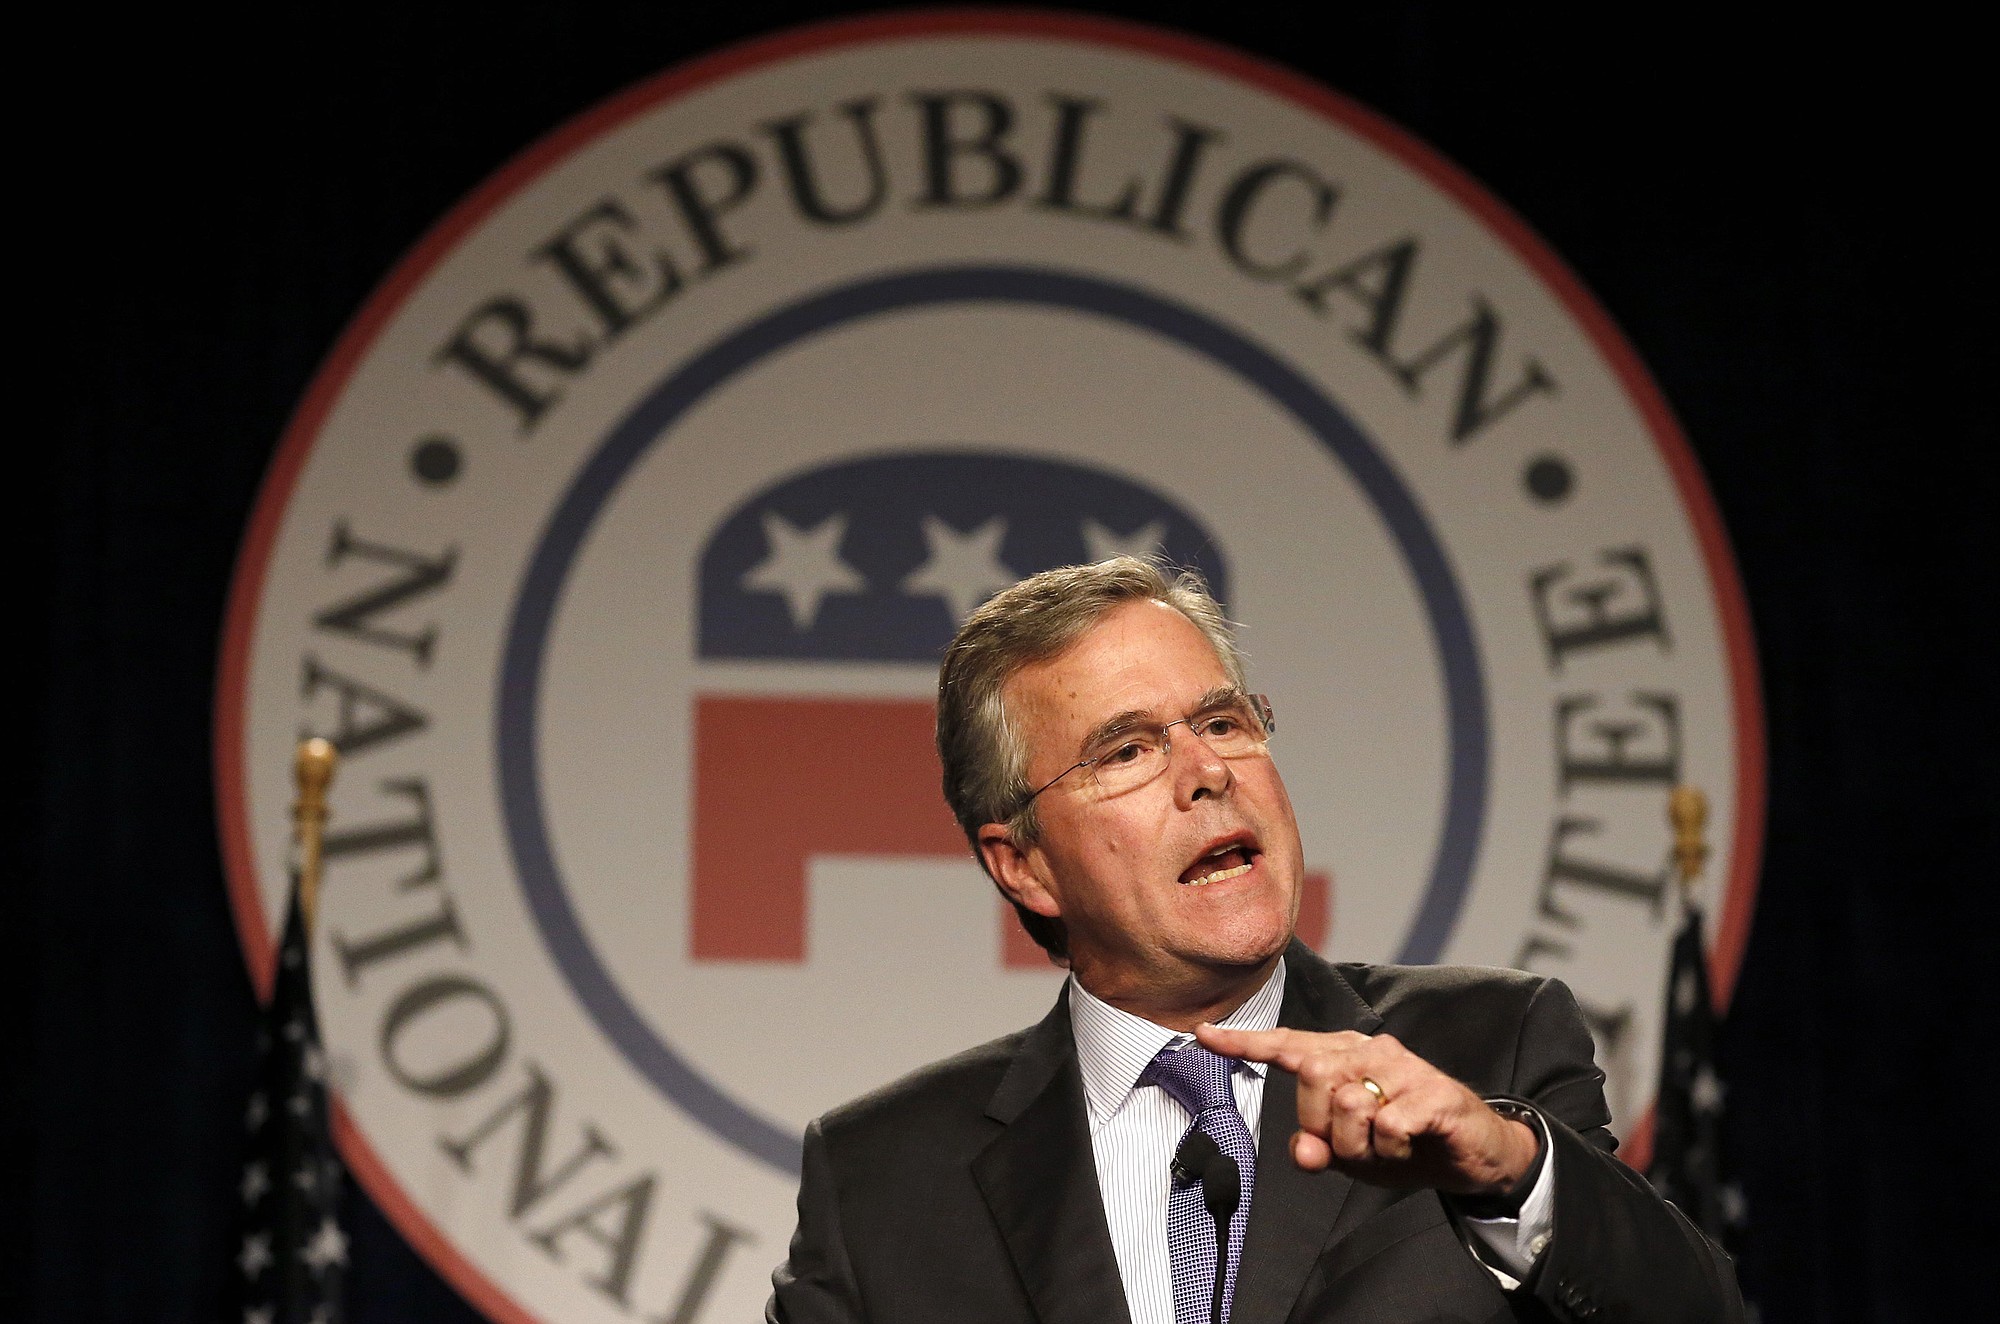 Former Florida Gov. Jeb Bush speaks Thursday at the Republican National Committee spring meeting in Scottsdale, Ariz. For more than four hours, Bush worked his way through the dimly lit hallway of an Arizona resort, shuttling from one room to the next, meeting with dozens of Republican officials, many for the first time.